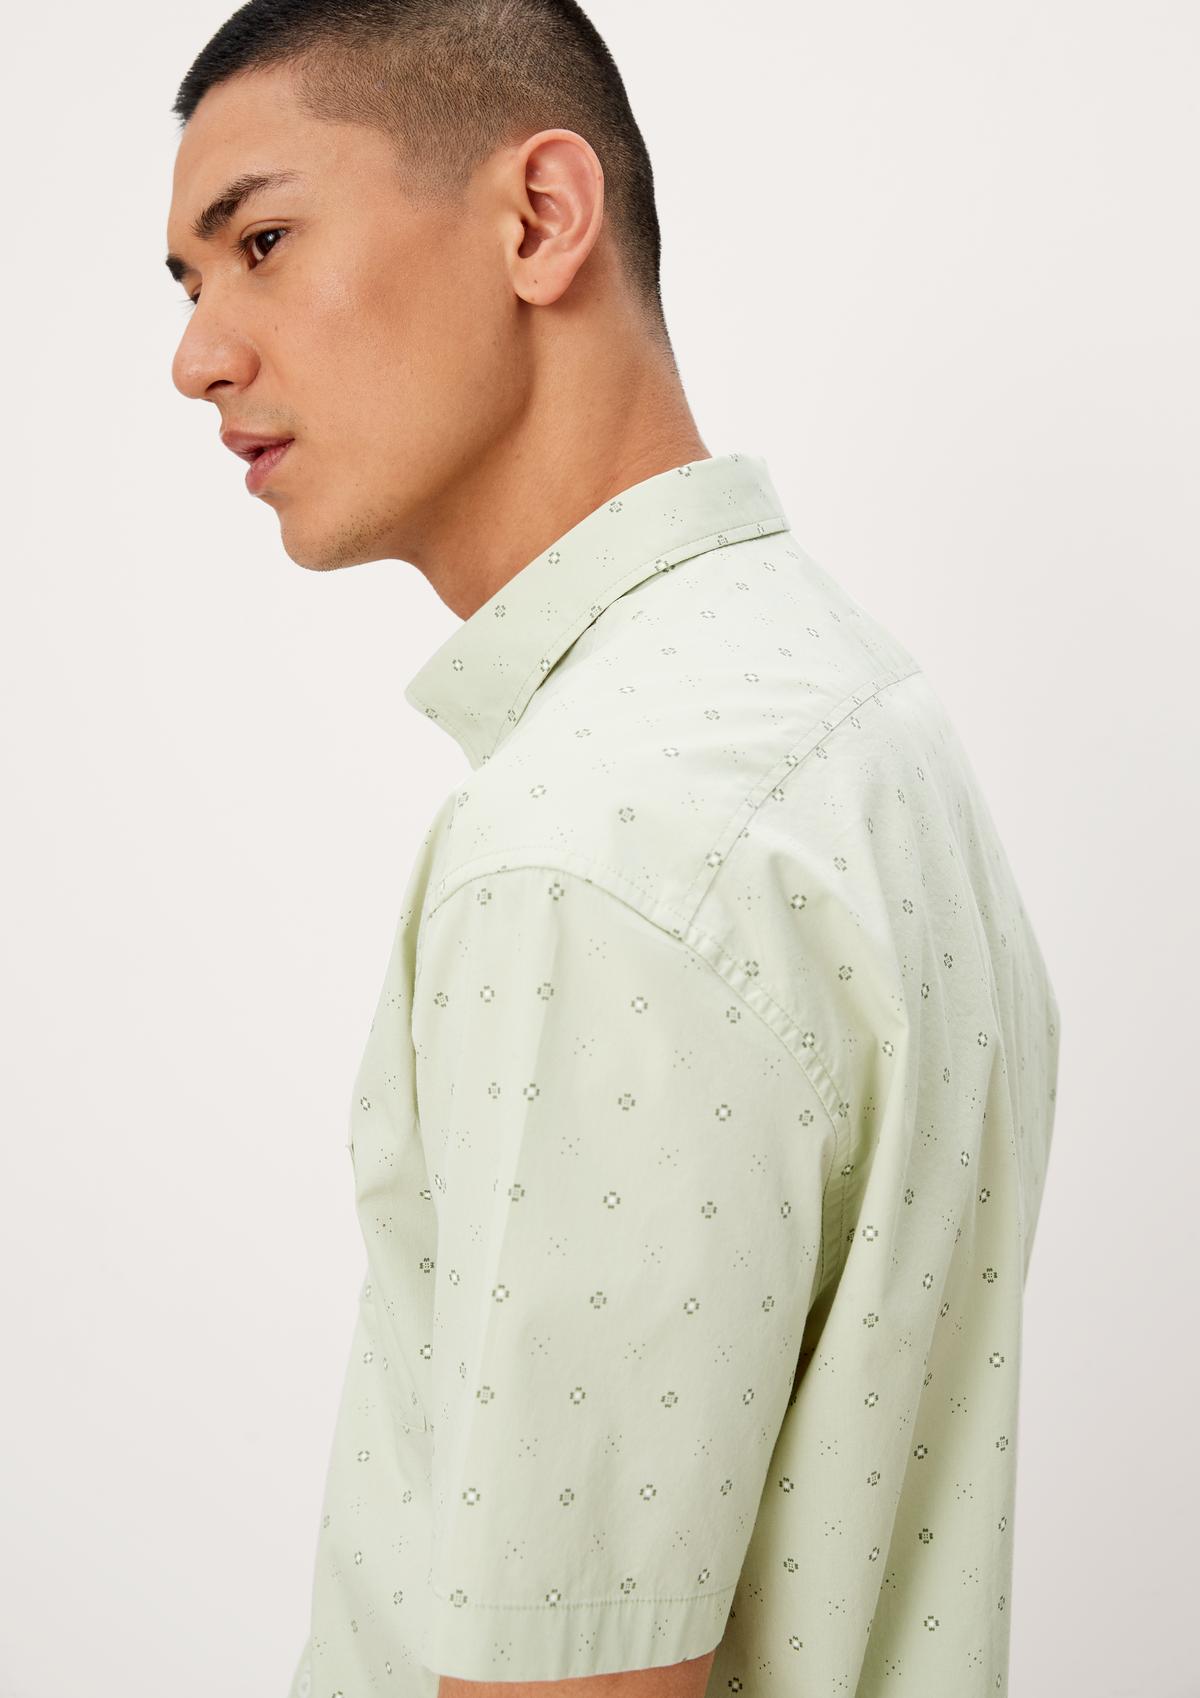 s.Oliver Regular fit: short sleeve shirt with a minimalist print